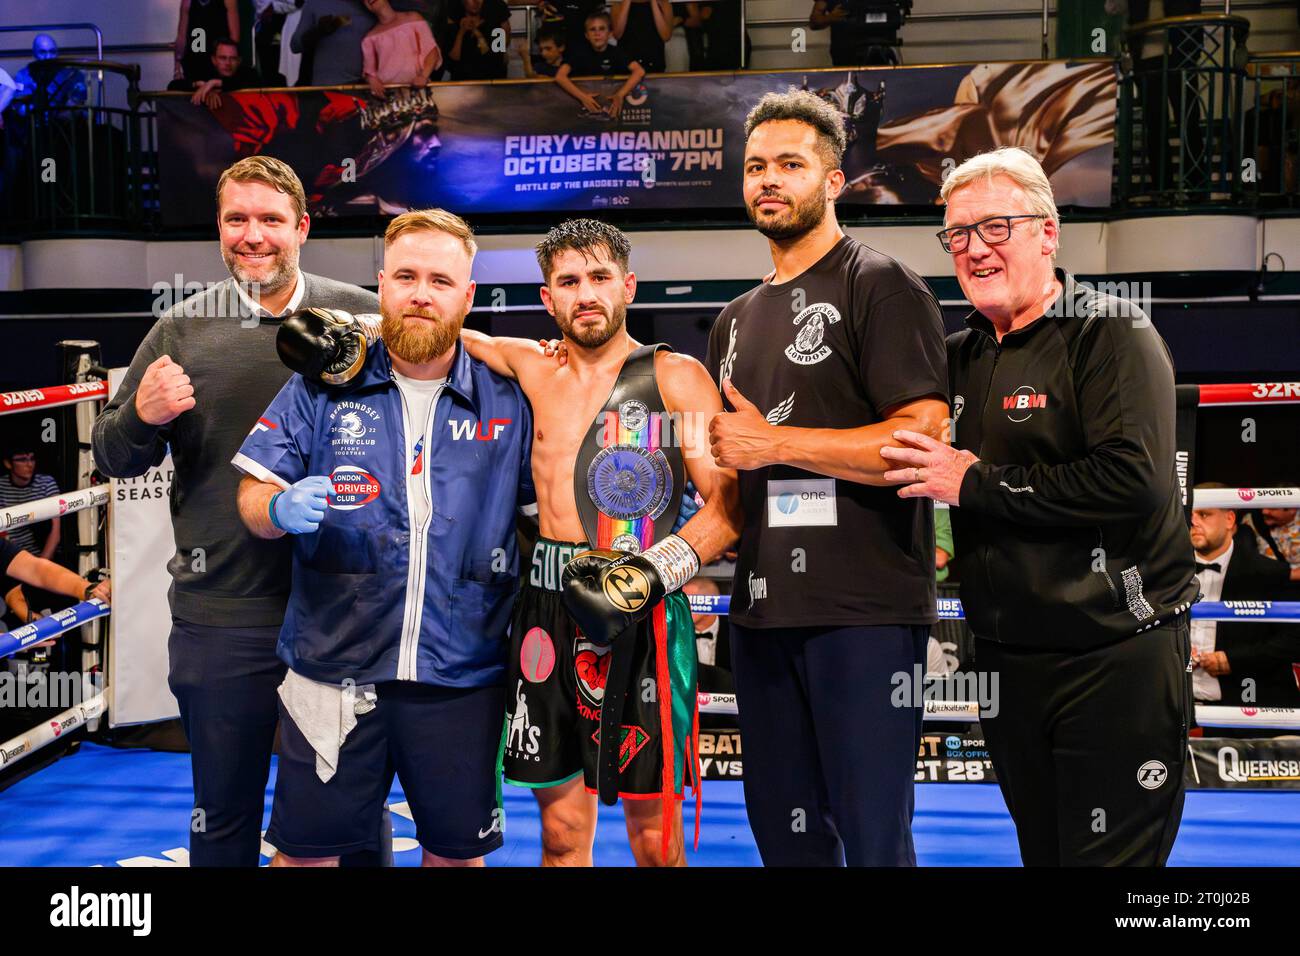 LONDON, UNITED KINGDOM. 06 Oct, 23. Masood Adbullah vs Marc Leach - Vacant Commonwealth Silver Featherweight Championship  during Zorro vs D'Ortenzi Fight Night and undercards at York Hall on Friday, October 06, 2023 in LONDON, ENGLAND. Credit: Taka G Wu/Alamy Live News Stock Photo